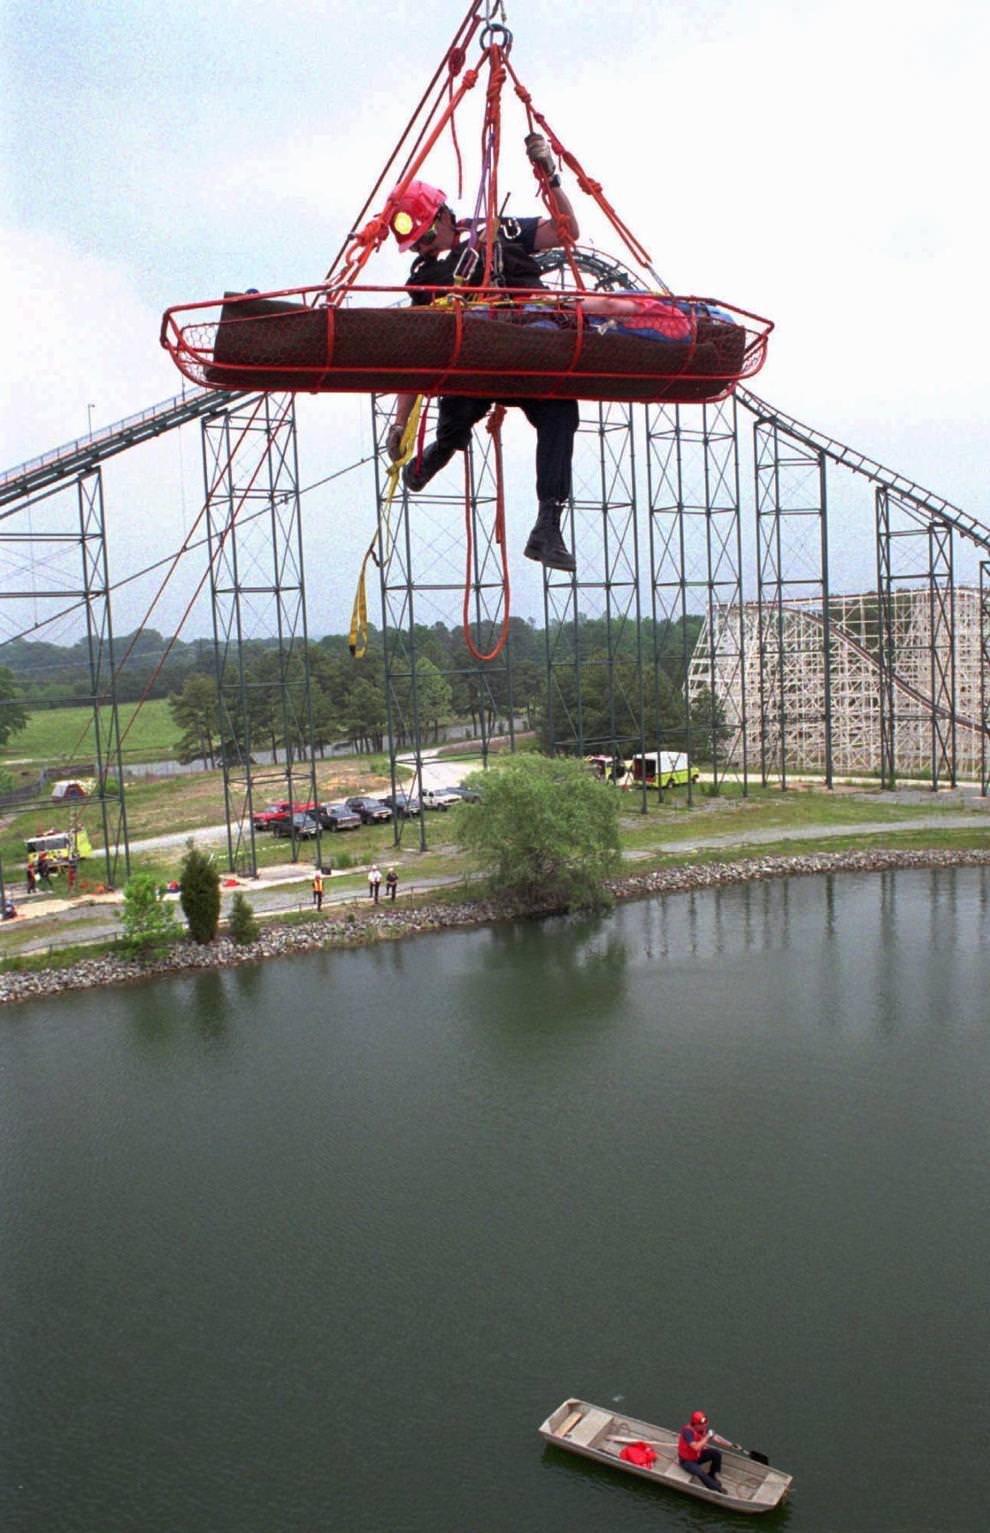 Wendy Wagner is transported across the lake at Paramount's Kings Dominion's Anaconda ride by Henrico firefighter Larry Bourne Wednesday, May 17, 1995, during a practice rescue.